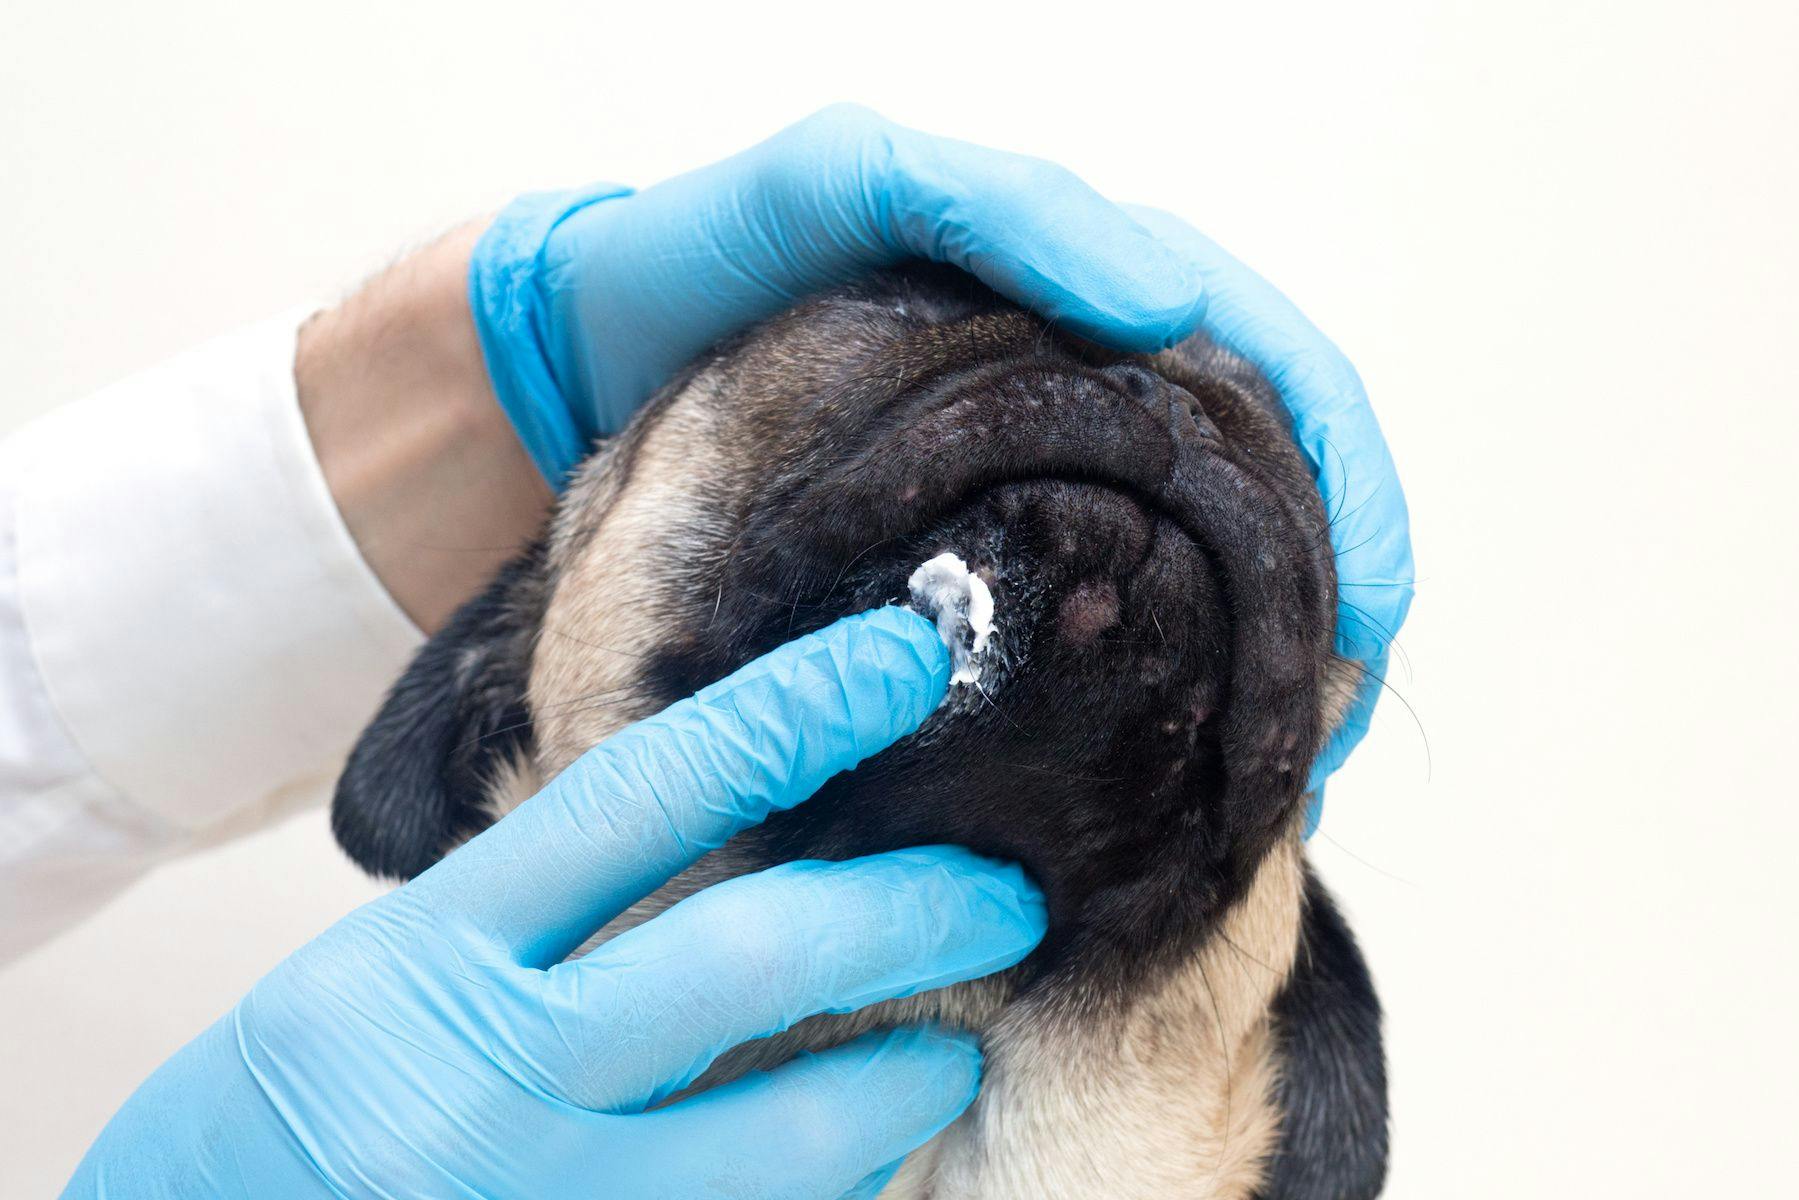 Applying a topical treatment to a dog's wound